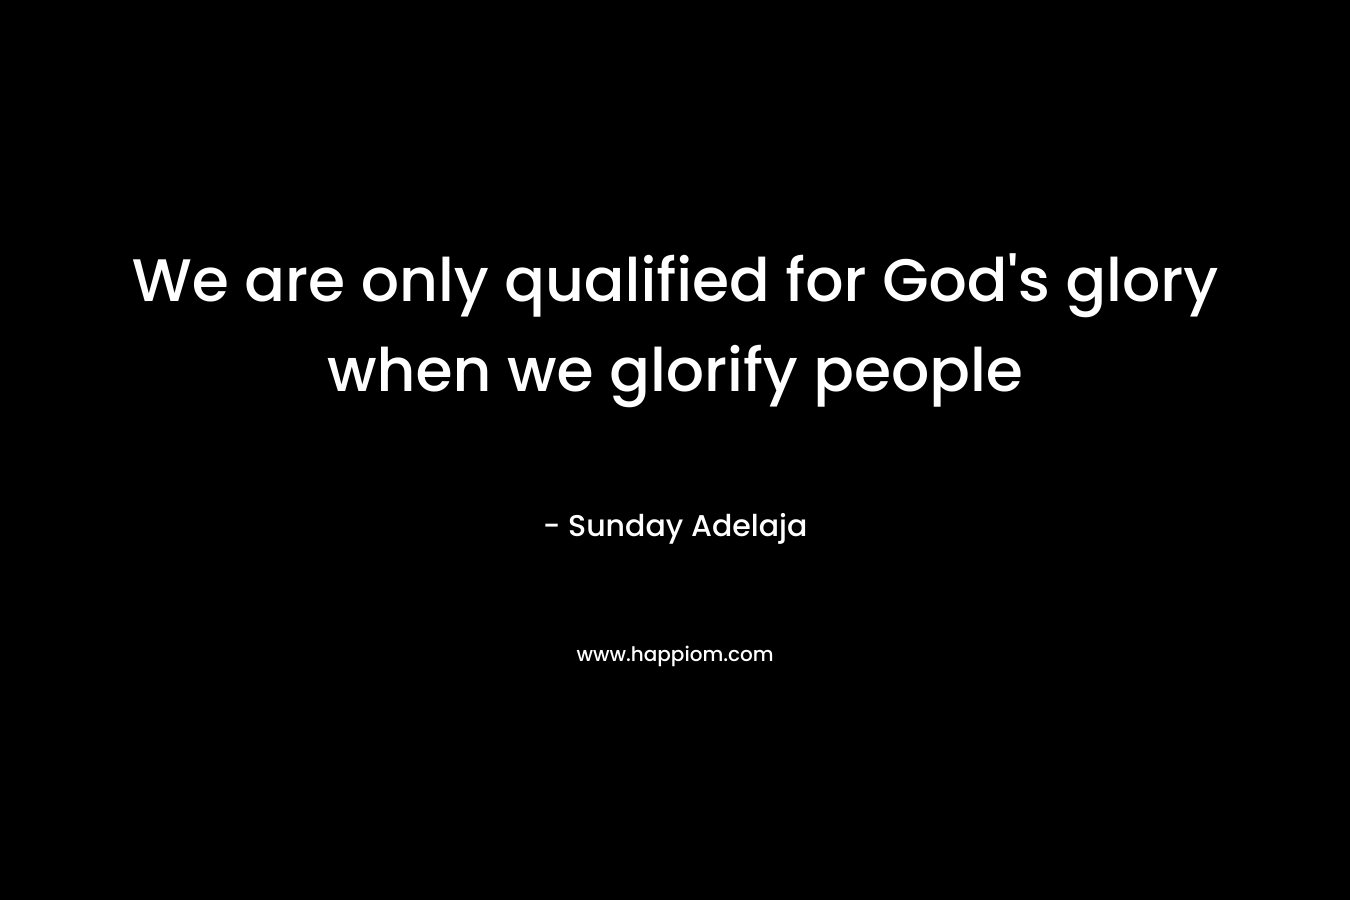 We are only qualified for God's glory when we glorify people